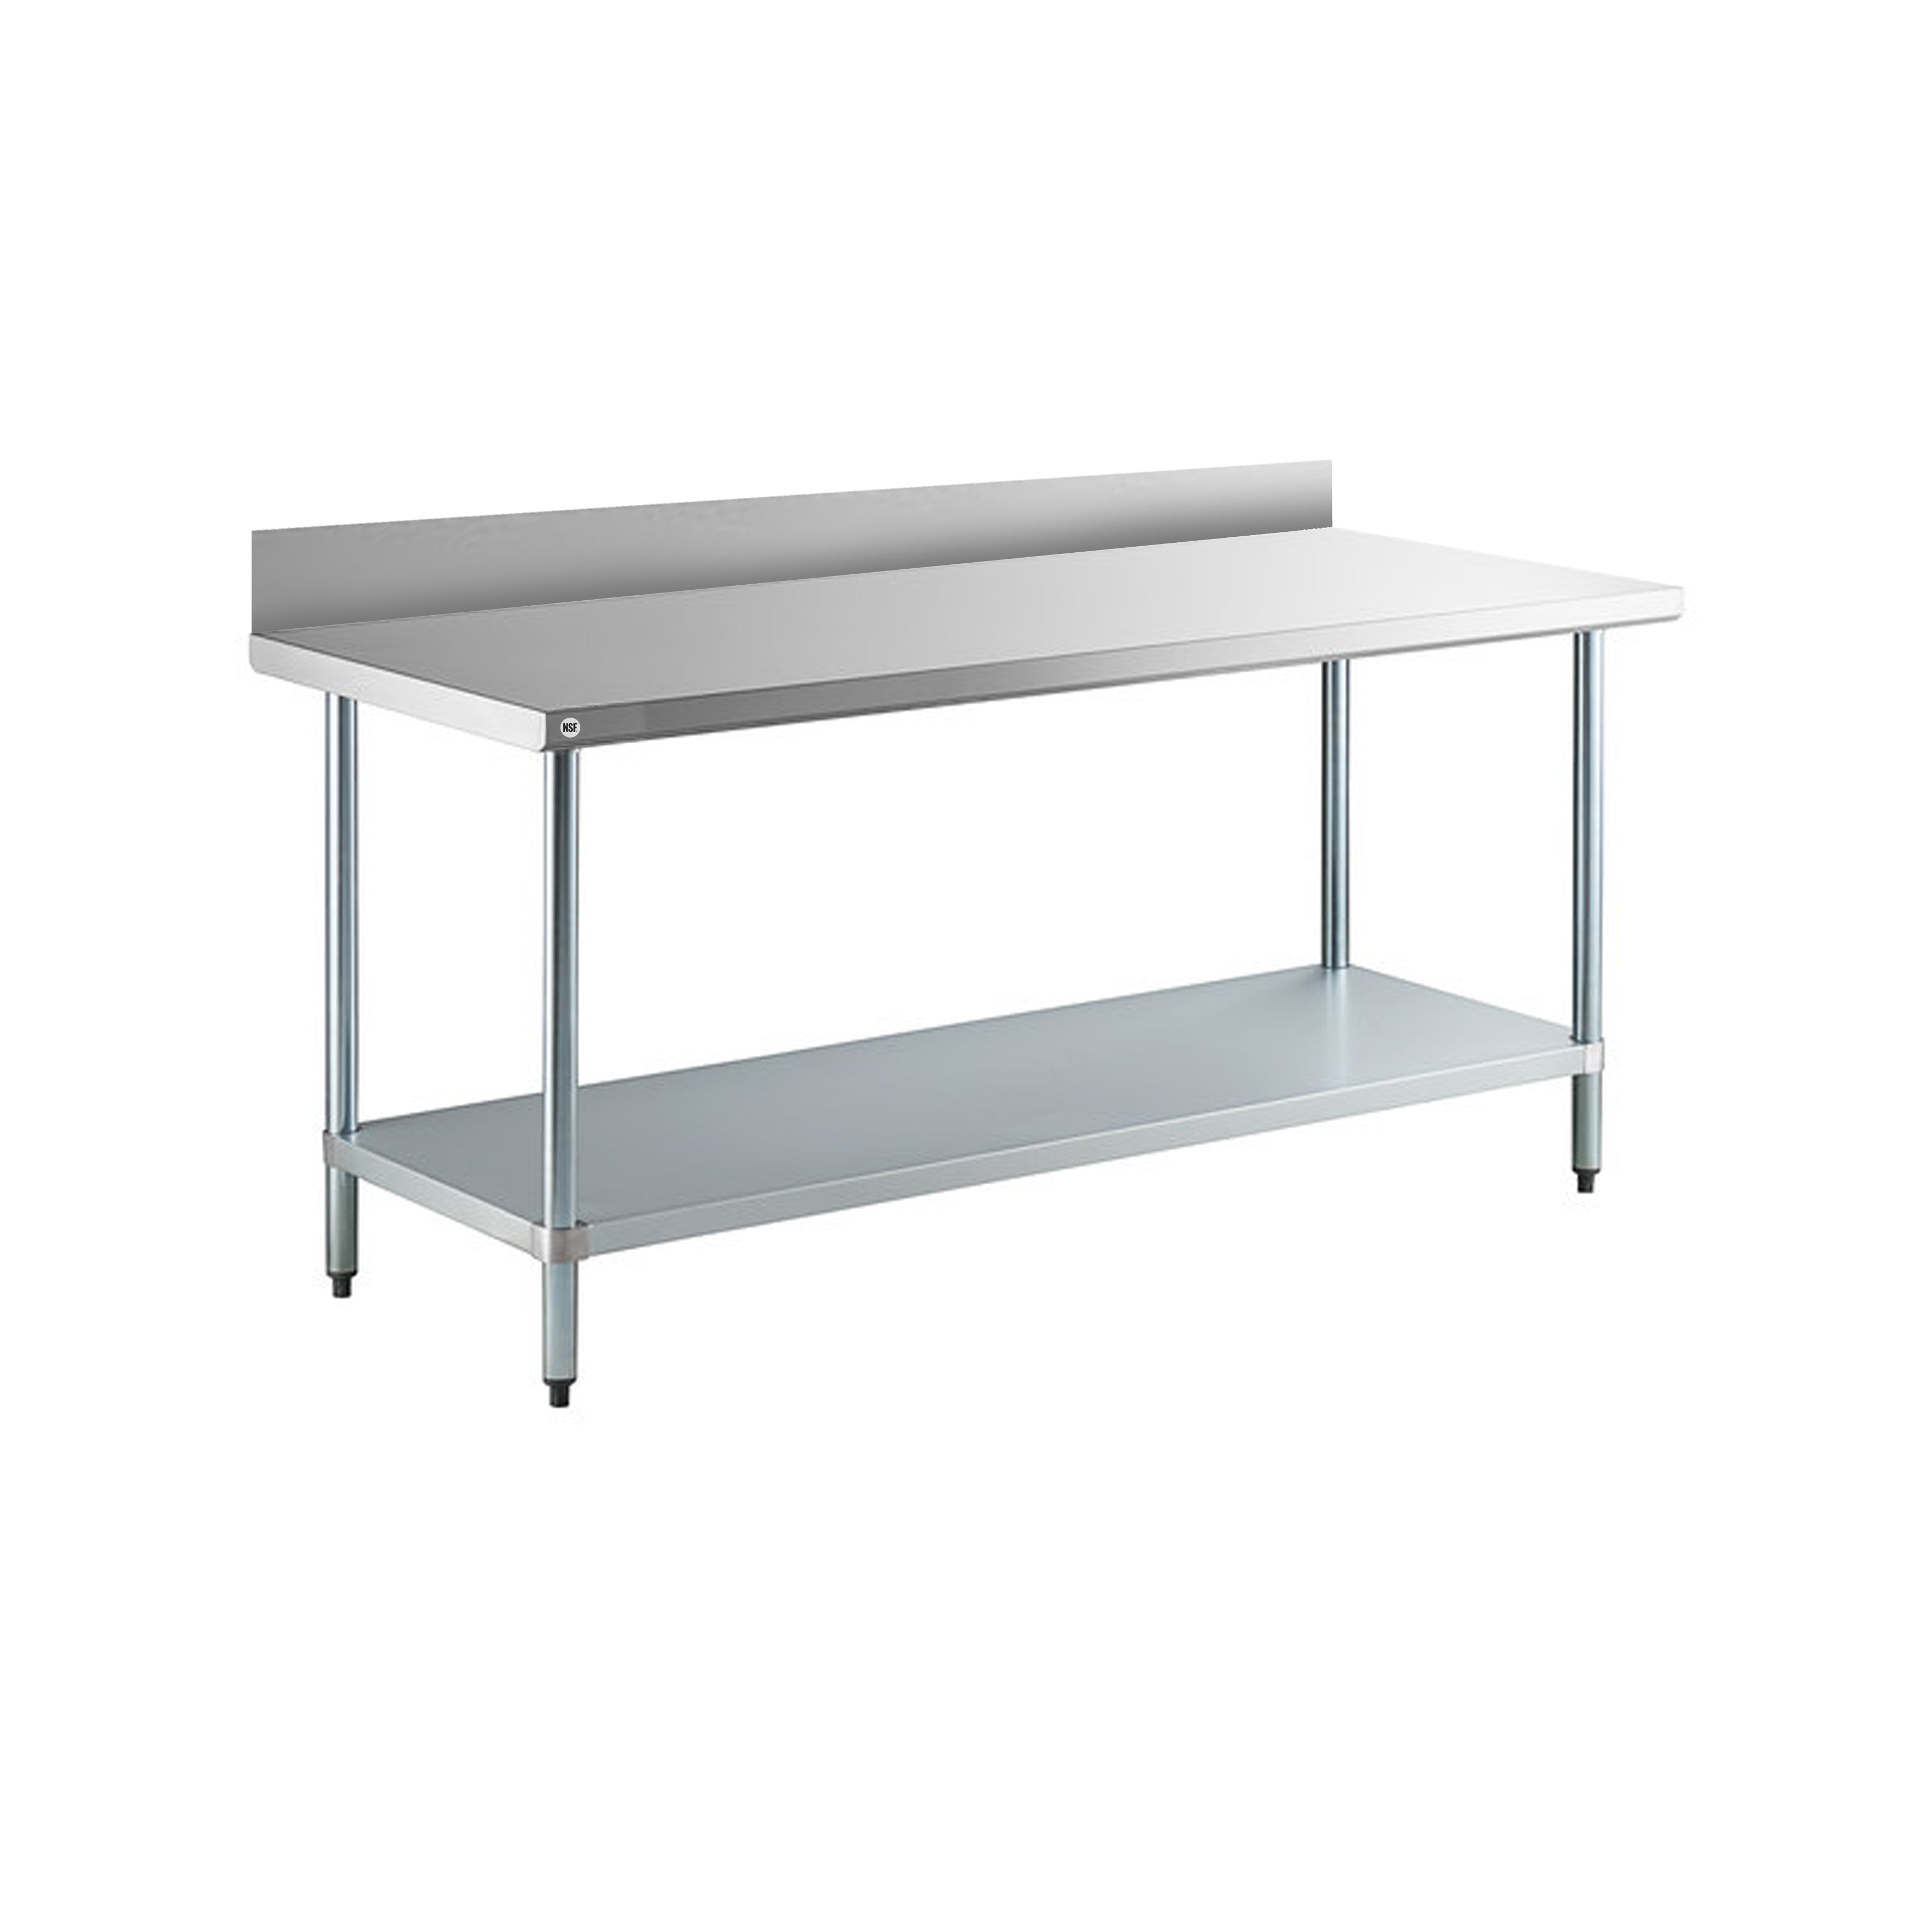 Omcan - 23804, Commercial 60" x 30" Stainless Steel Kitchen Work Table with 4" Back Splash 1200lbs Medium Duty